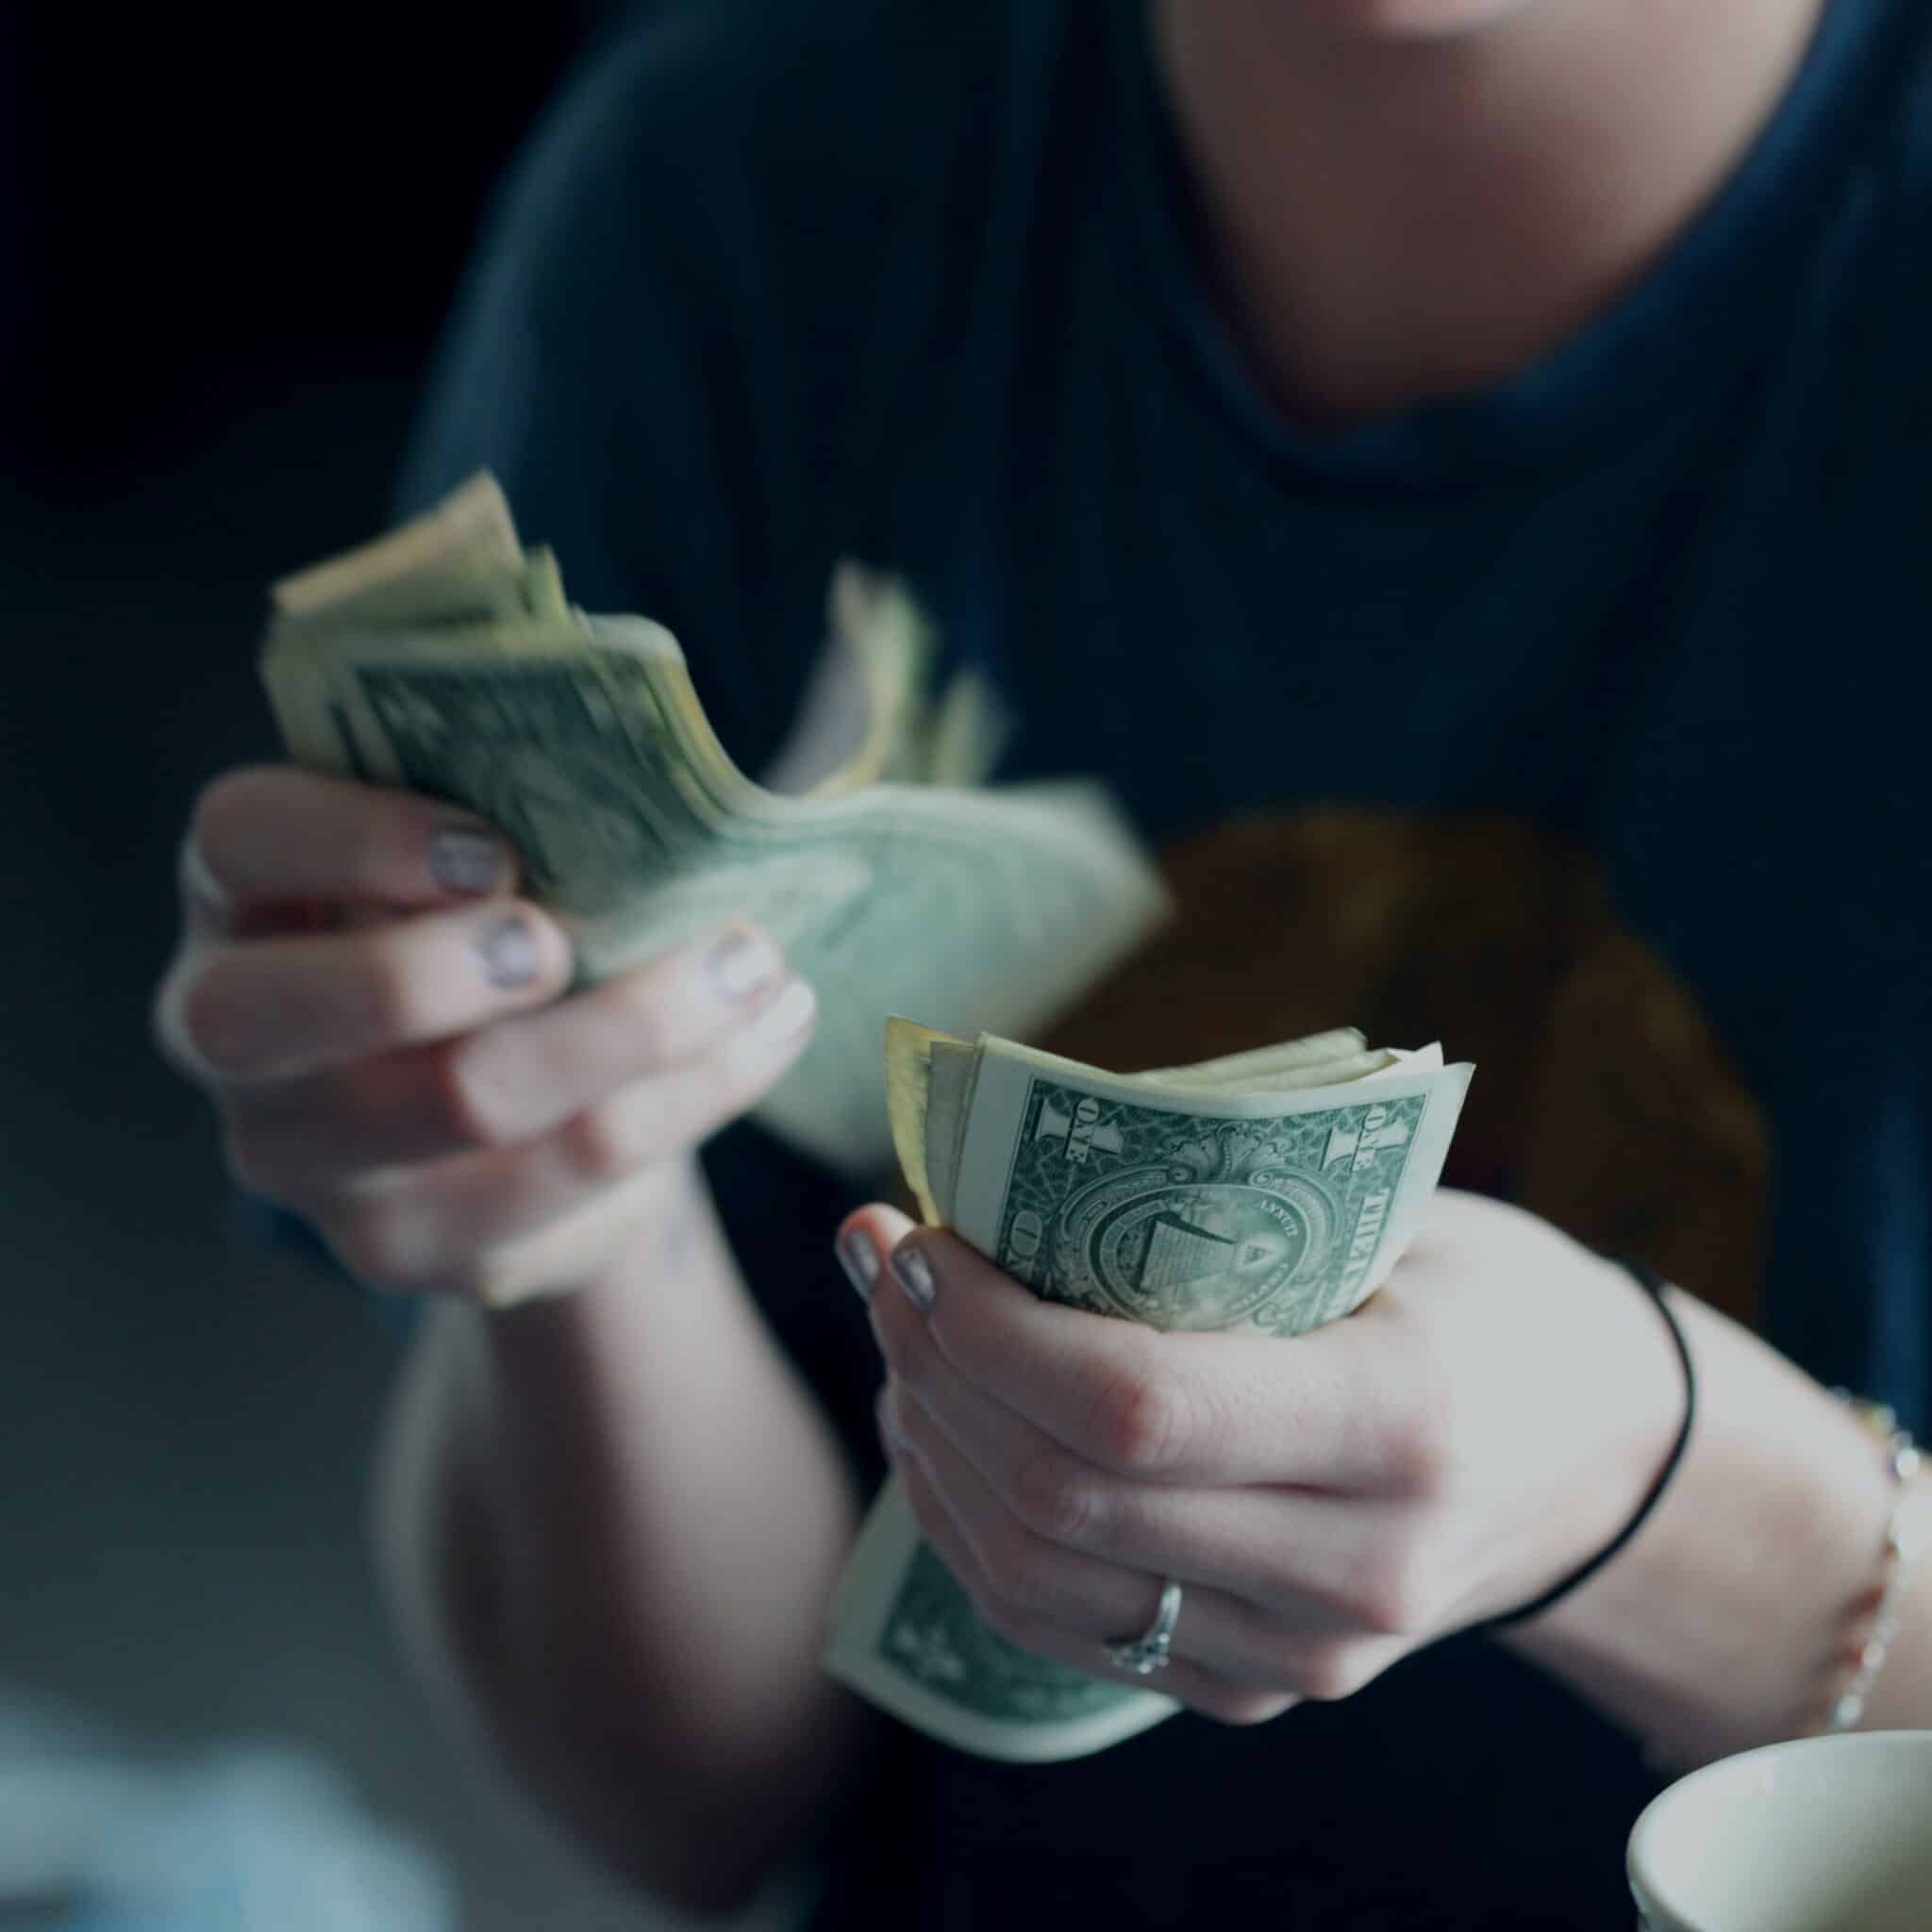 Close-up view of person's hands while counting American dollar bills. Person is wearing a dark shirt and face is out of view.